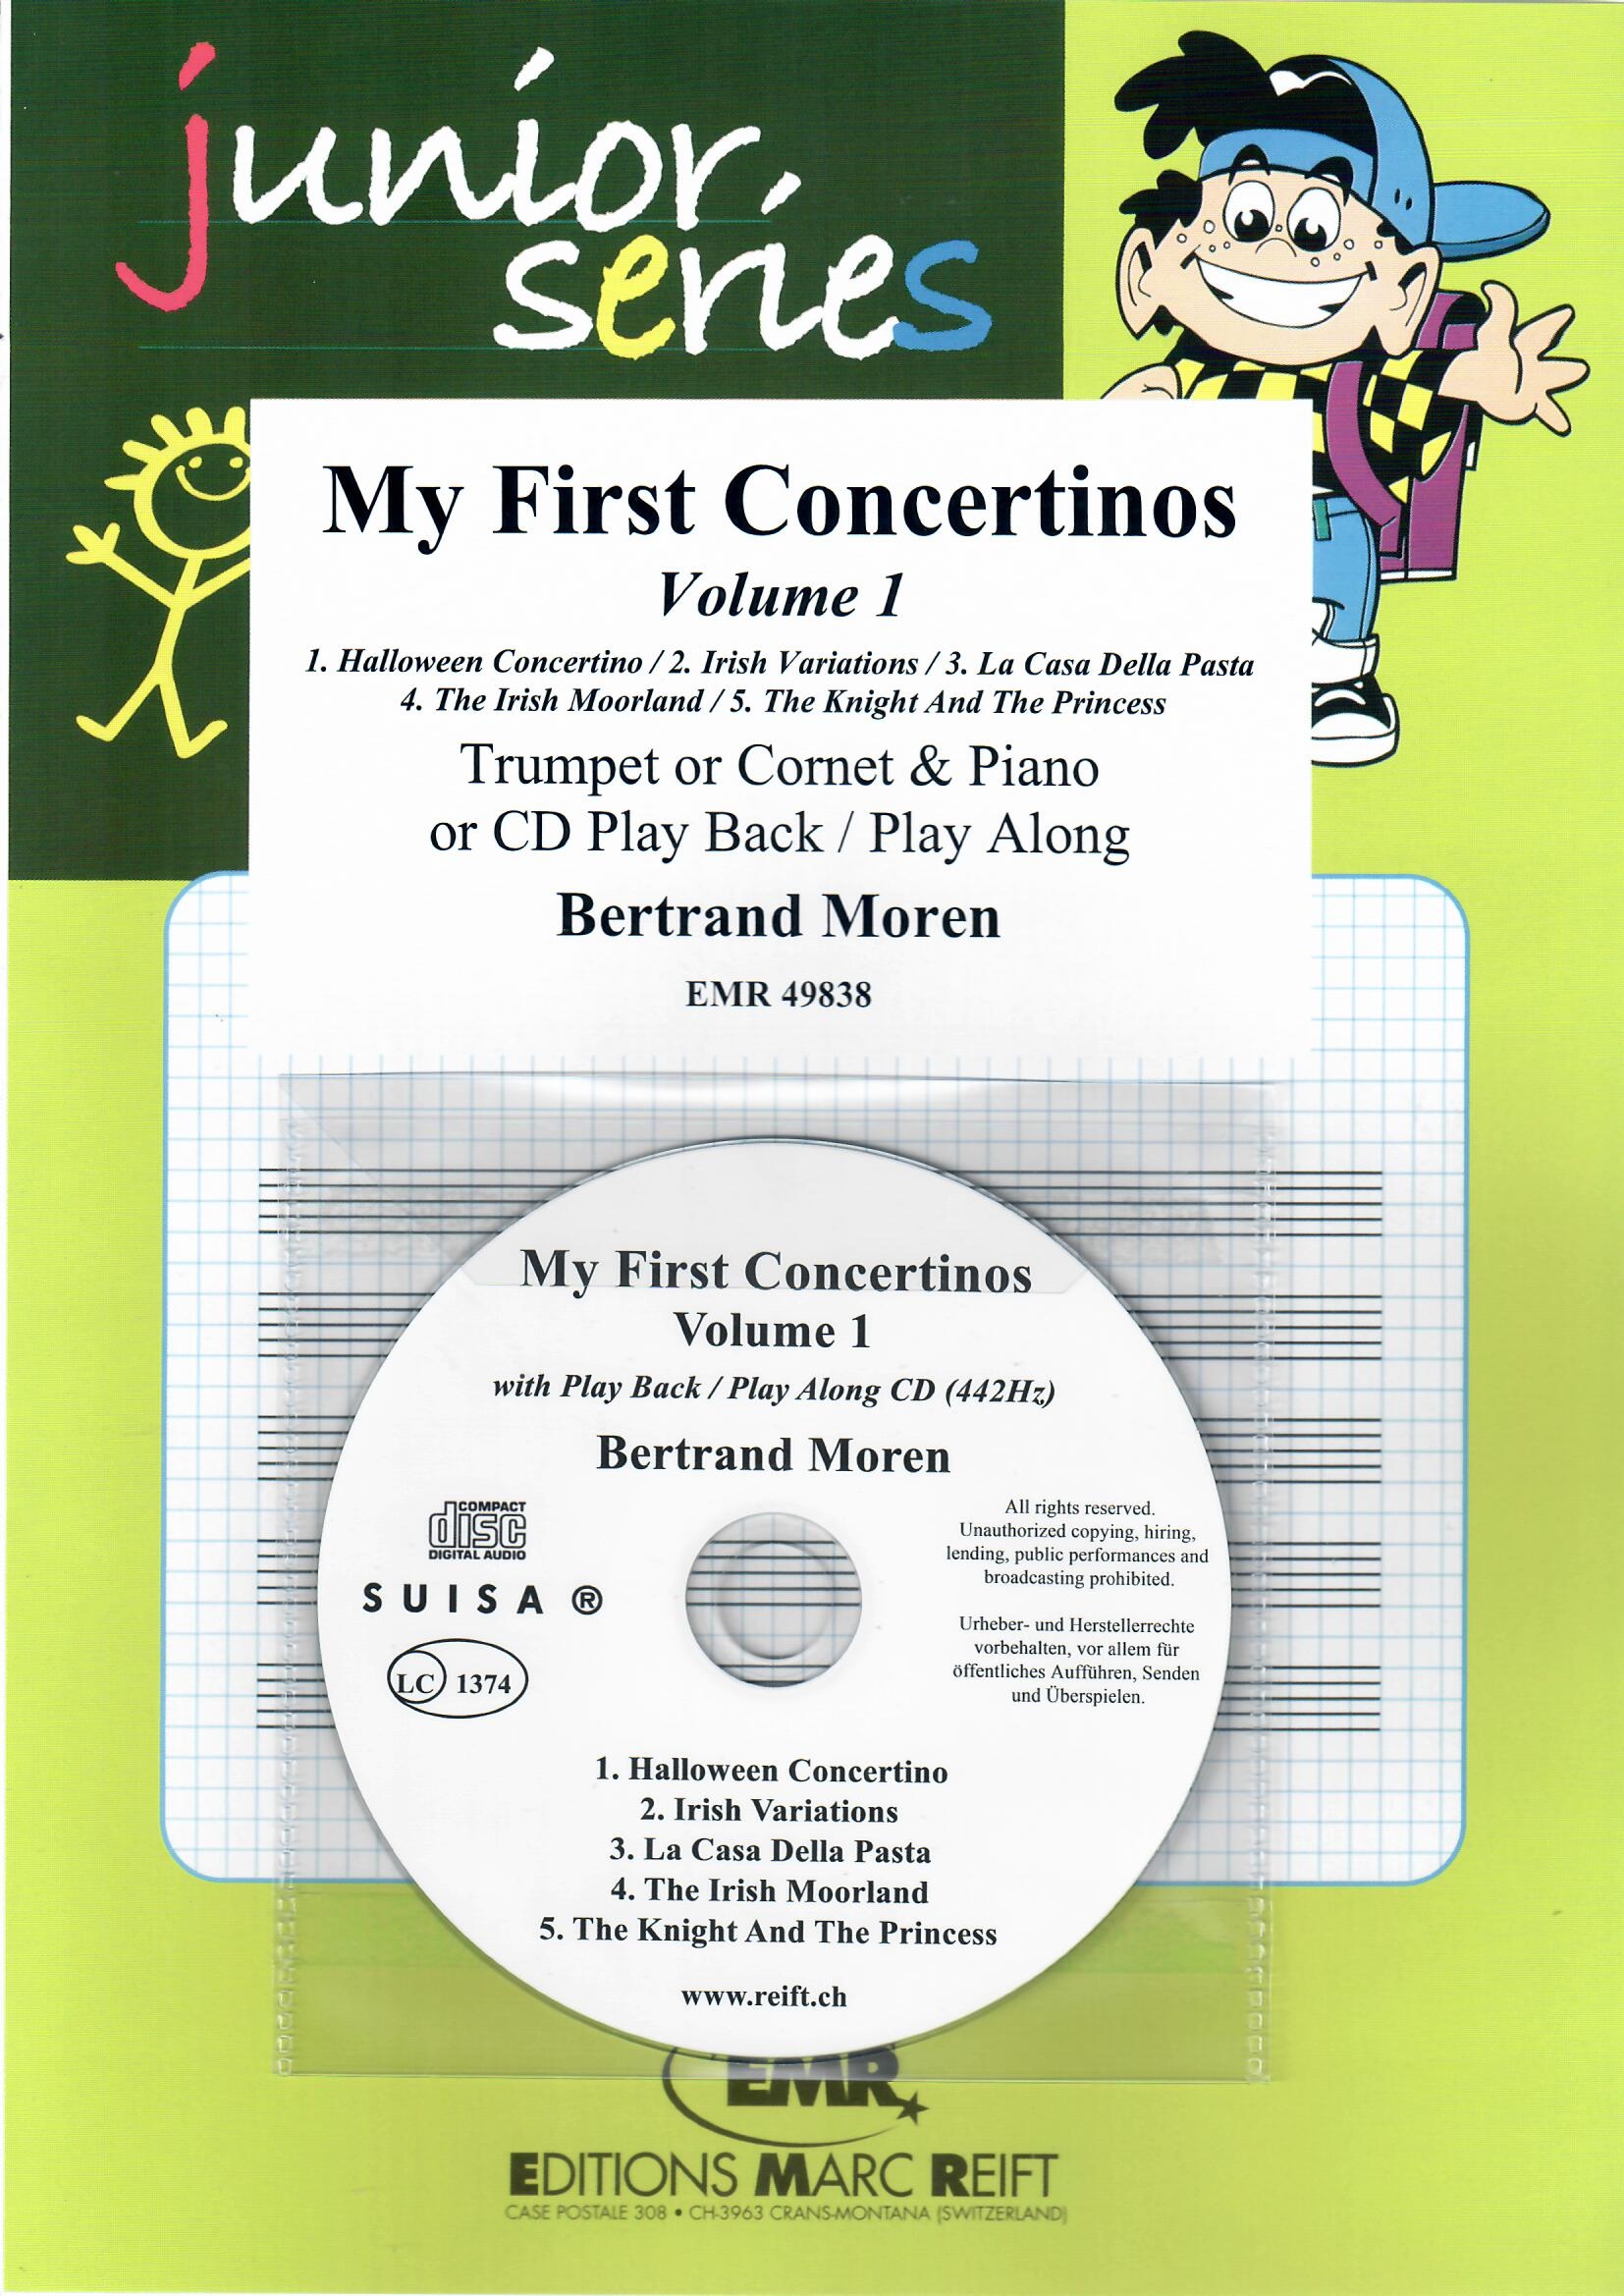 MY FIRST CONCERTINOS VOLUME 1 - Trumpet & Piano